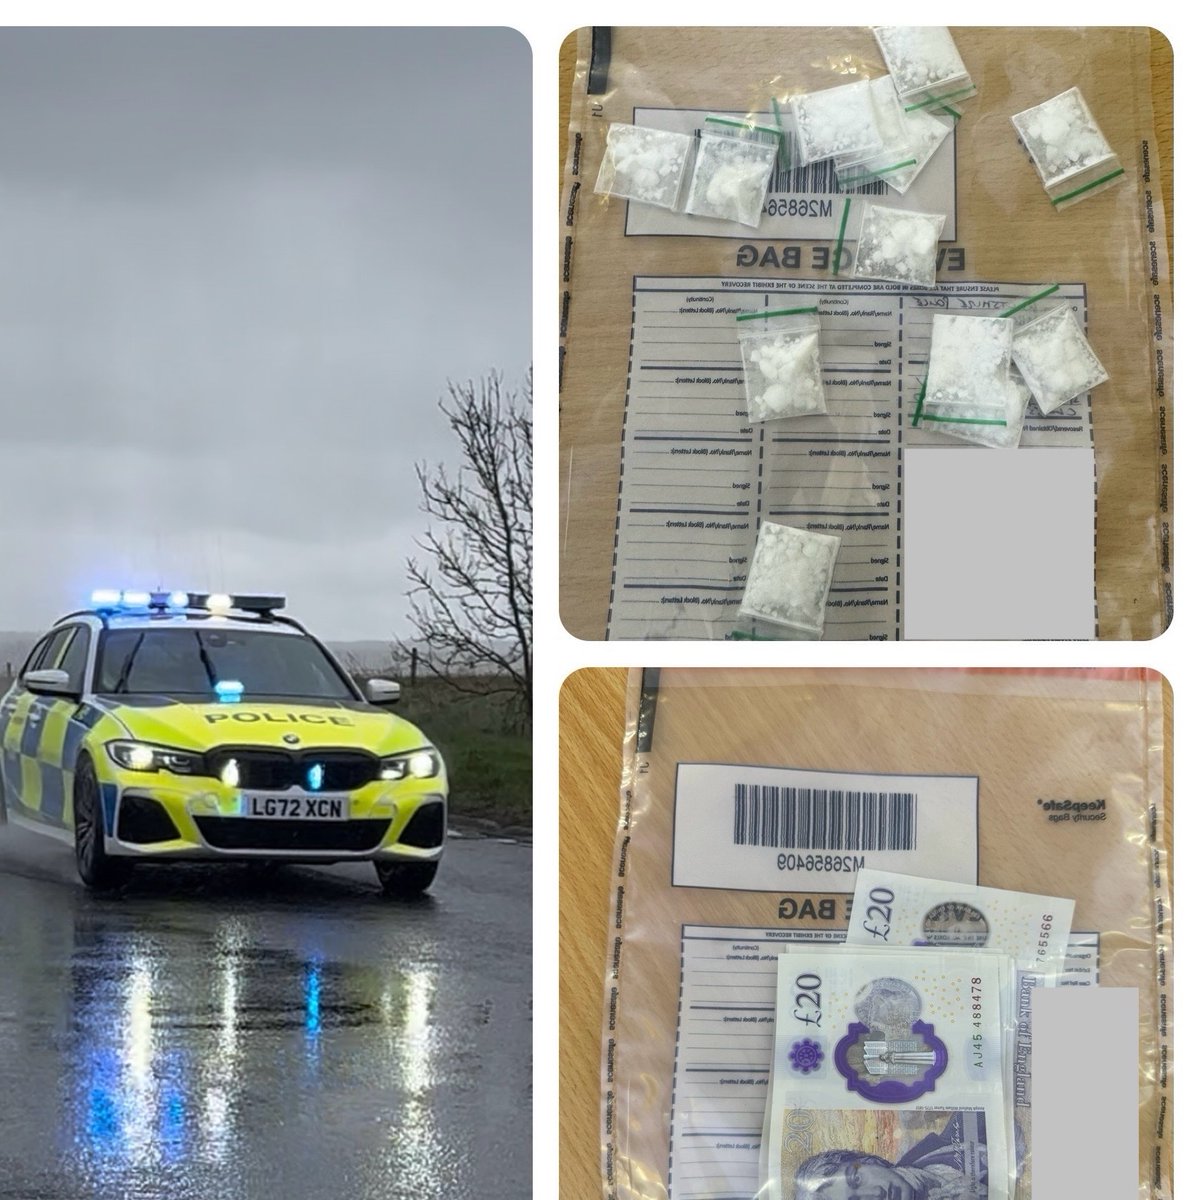 #RPU with one in custody this afternoon in Trowbridge, for driving whilst disqualified. A further search of the suspects vehicle revealed suspected class A drugs and cash. Now a supplying of drugs investigation and big problems for the driver. Vehicle seized! #RPU #S165 #FATAL5